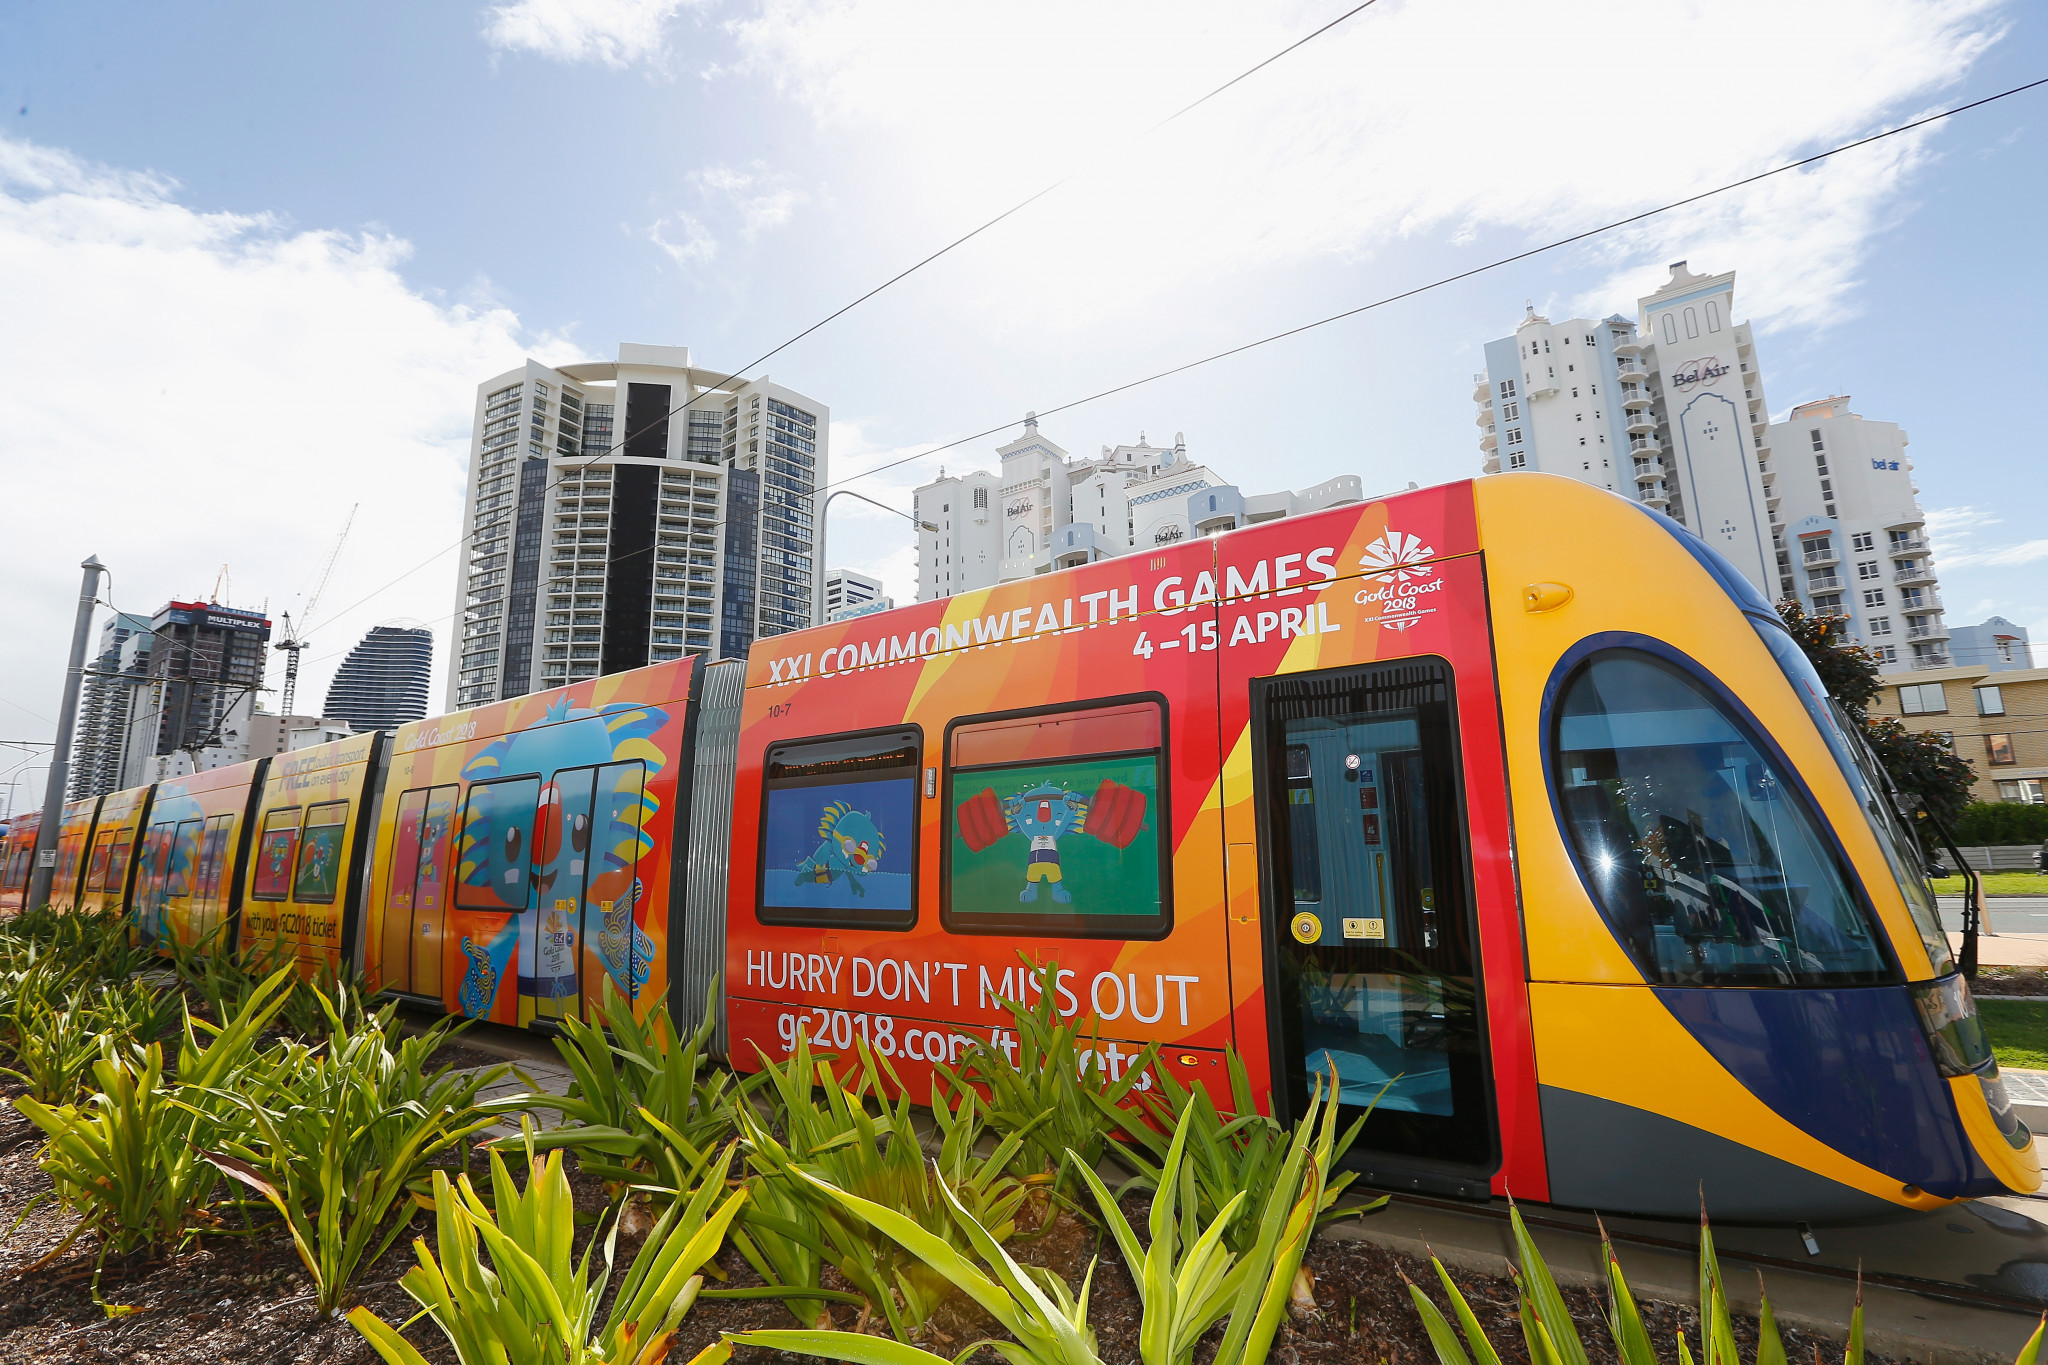 Gold Coast 2018 are steering the public towards public transport at the Games to avoid traffic ©Getty Images